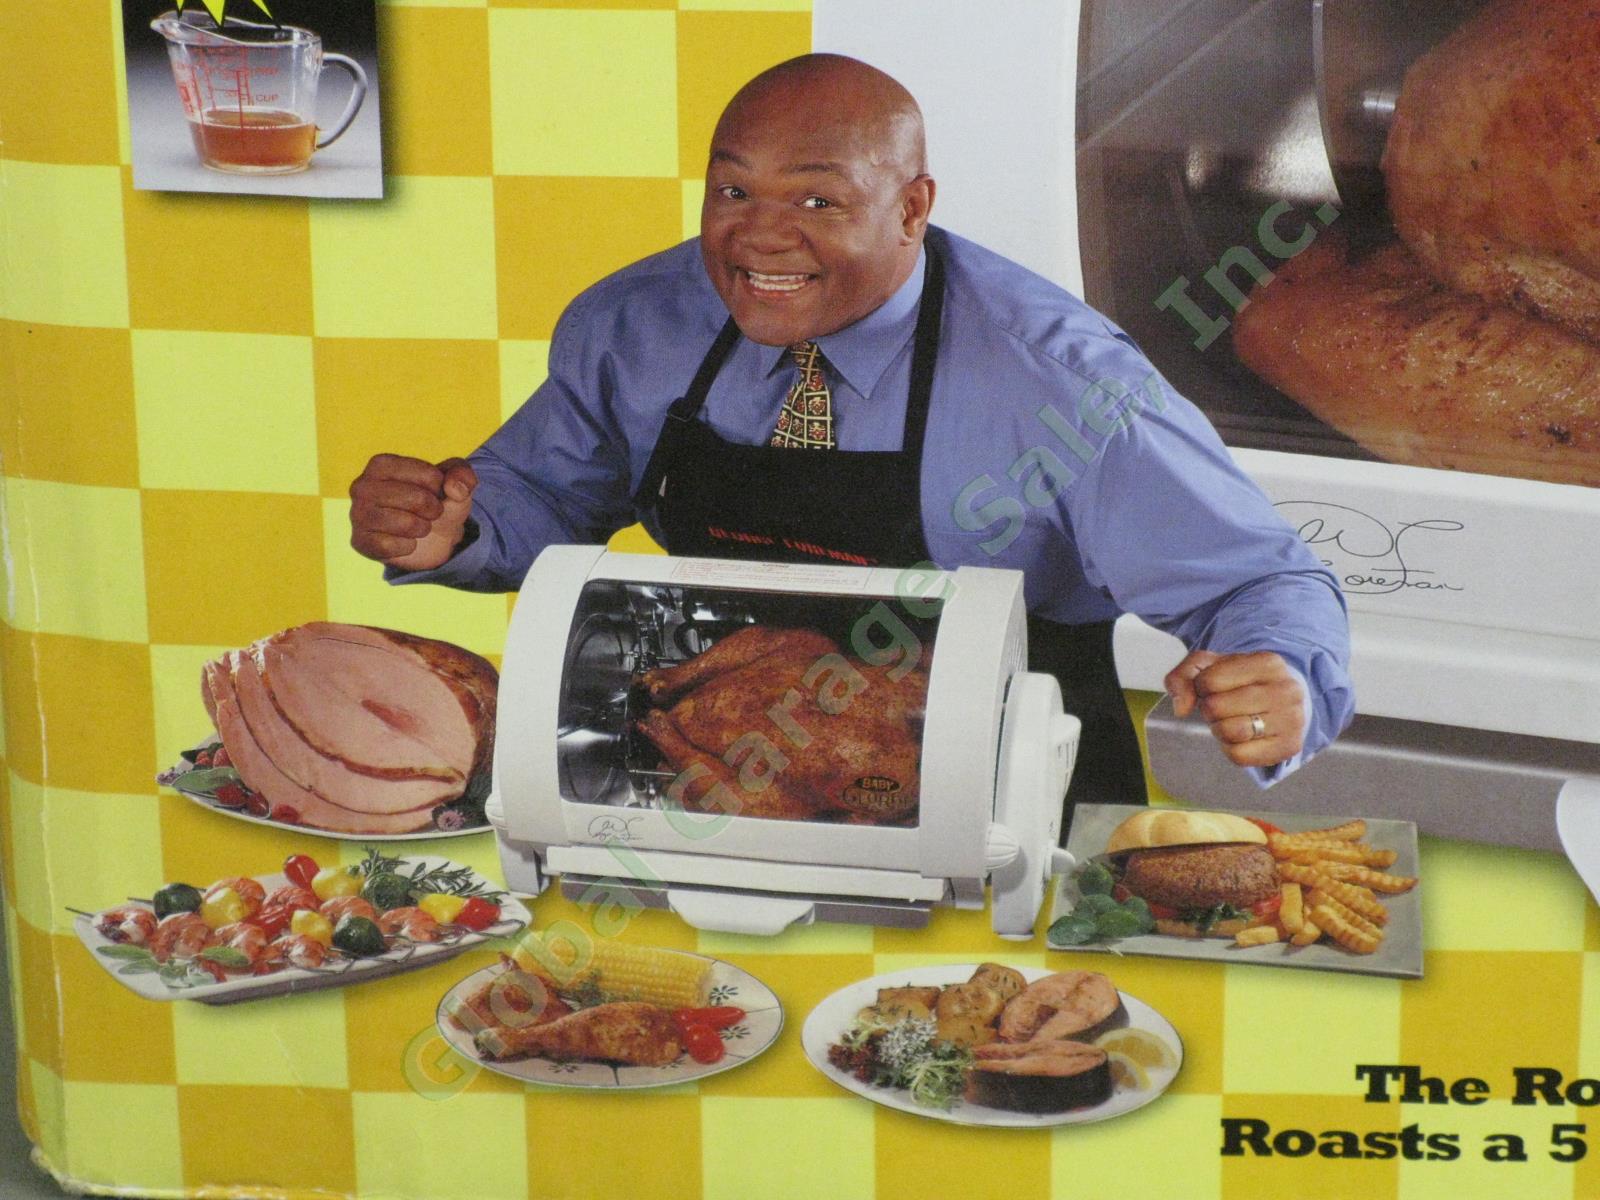 New In Box! George Foreman Baby George Rotisserie Roasting Machine Model GR59A 1